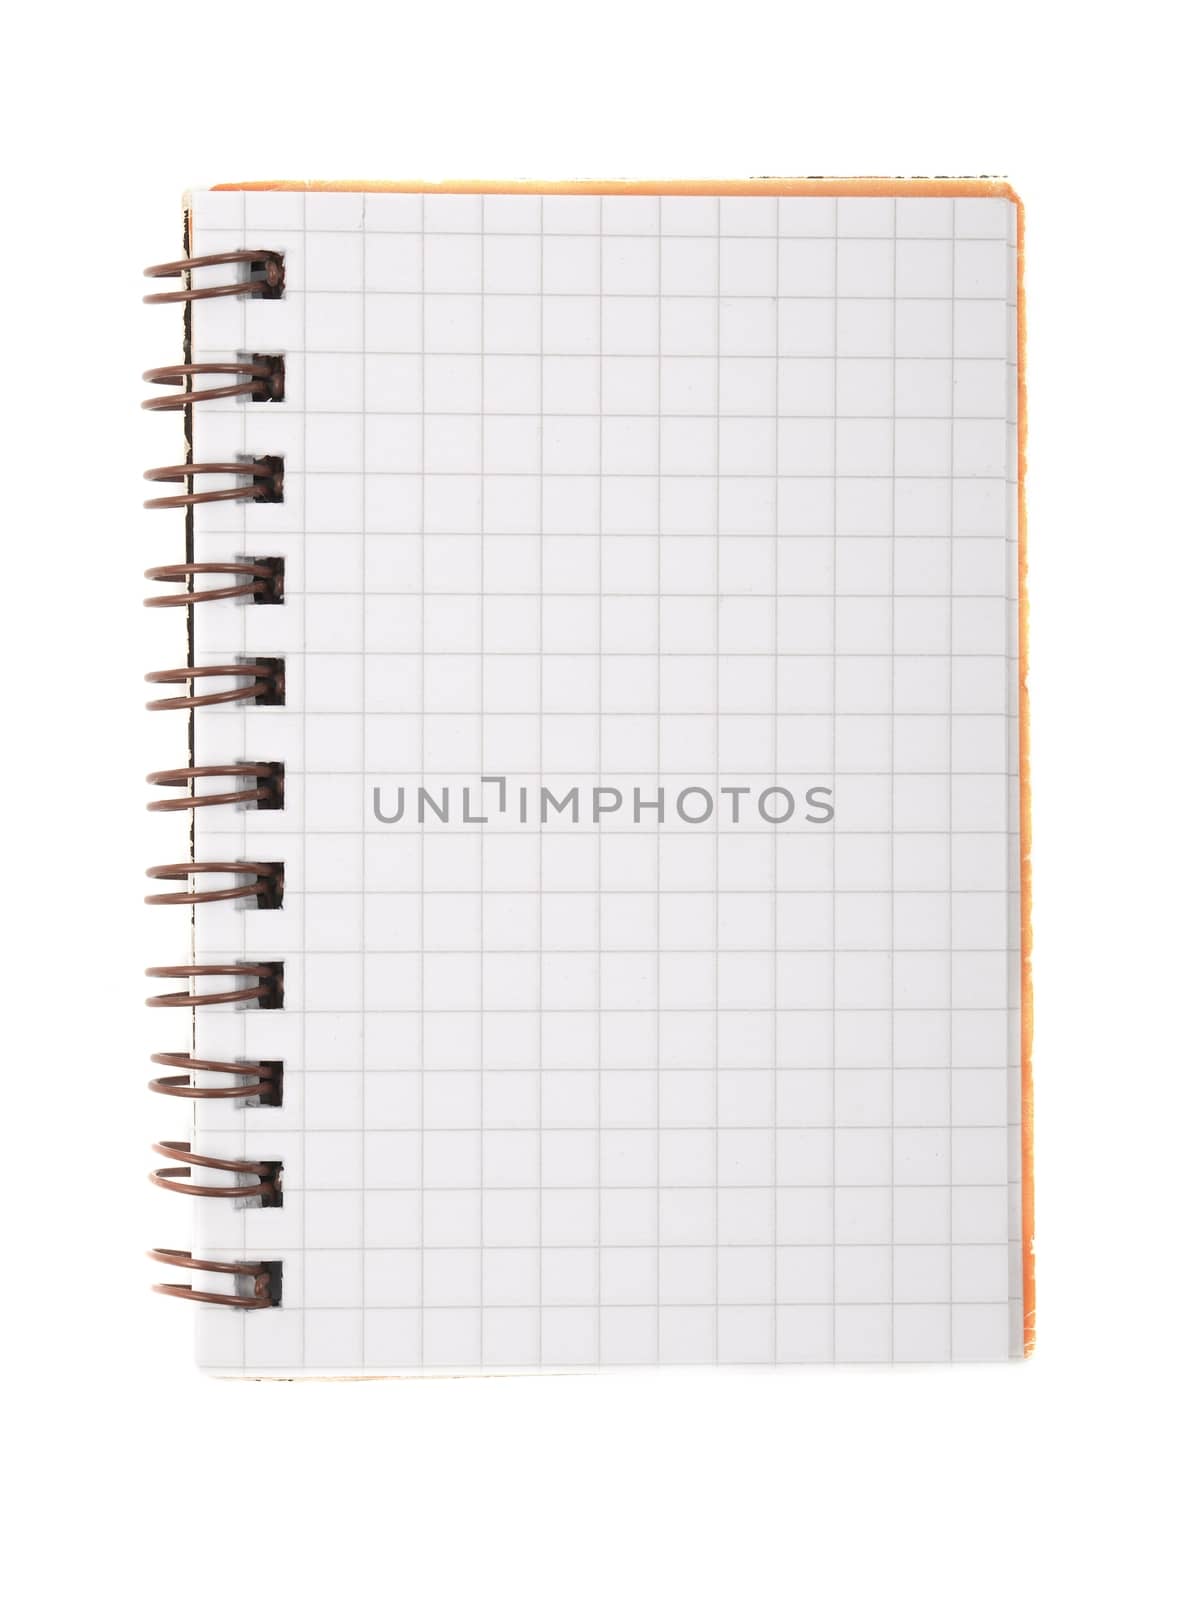 Notebook with square grid on a table